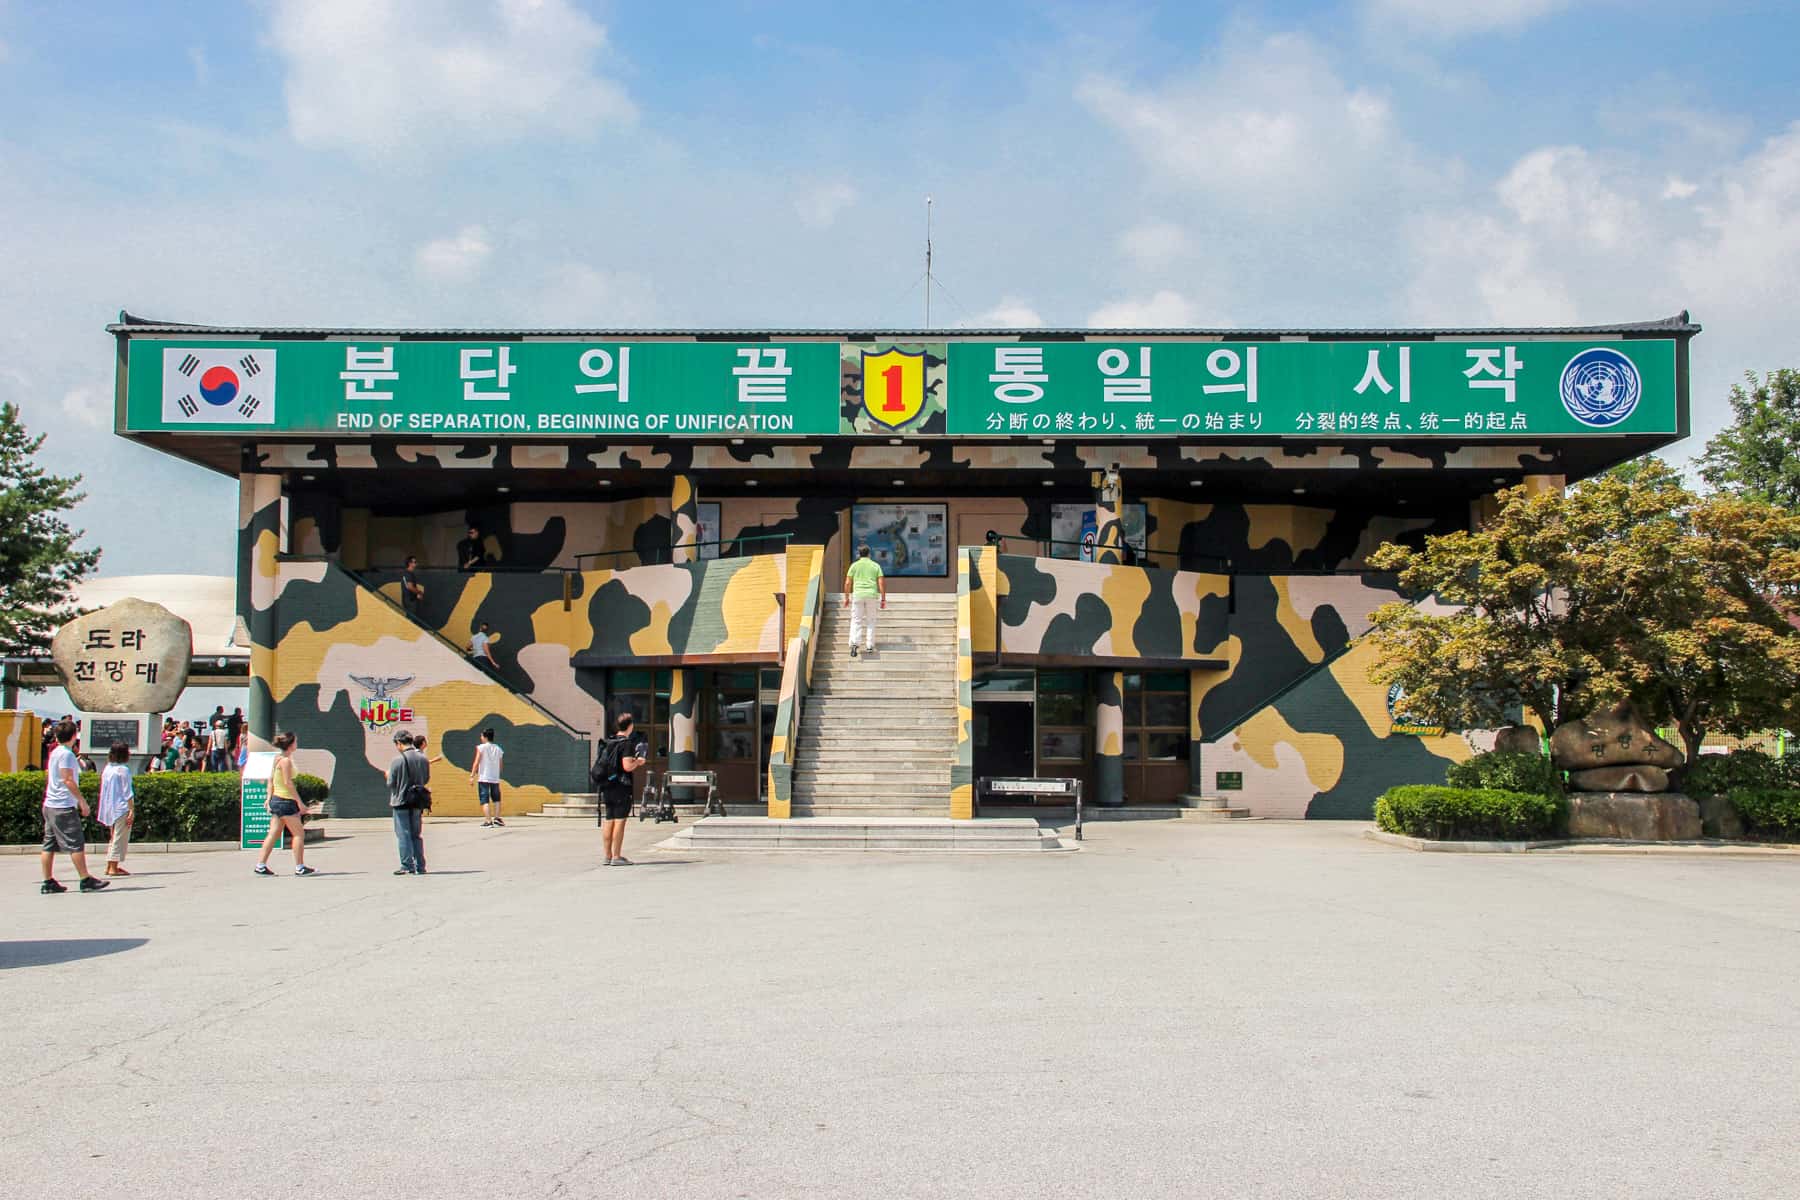 People stand outside a building painted with army camouflage with a green sign with Korean writing - the Dora Observatory at the DMZ.